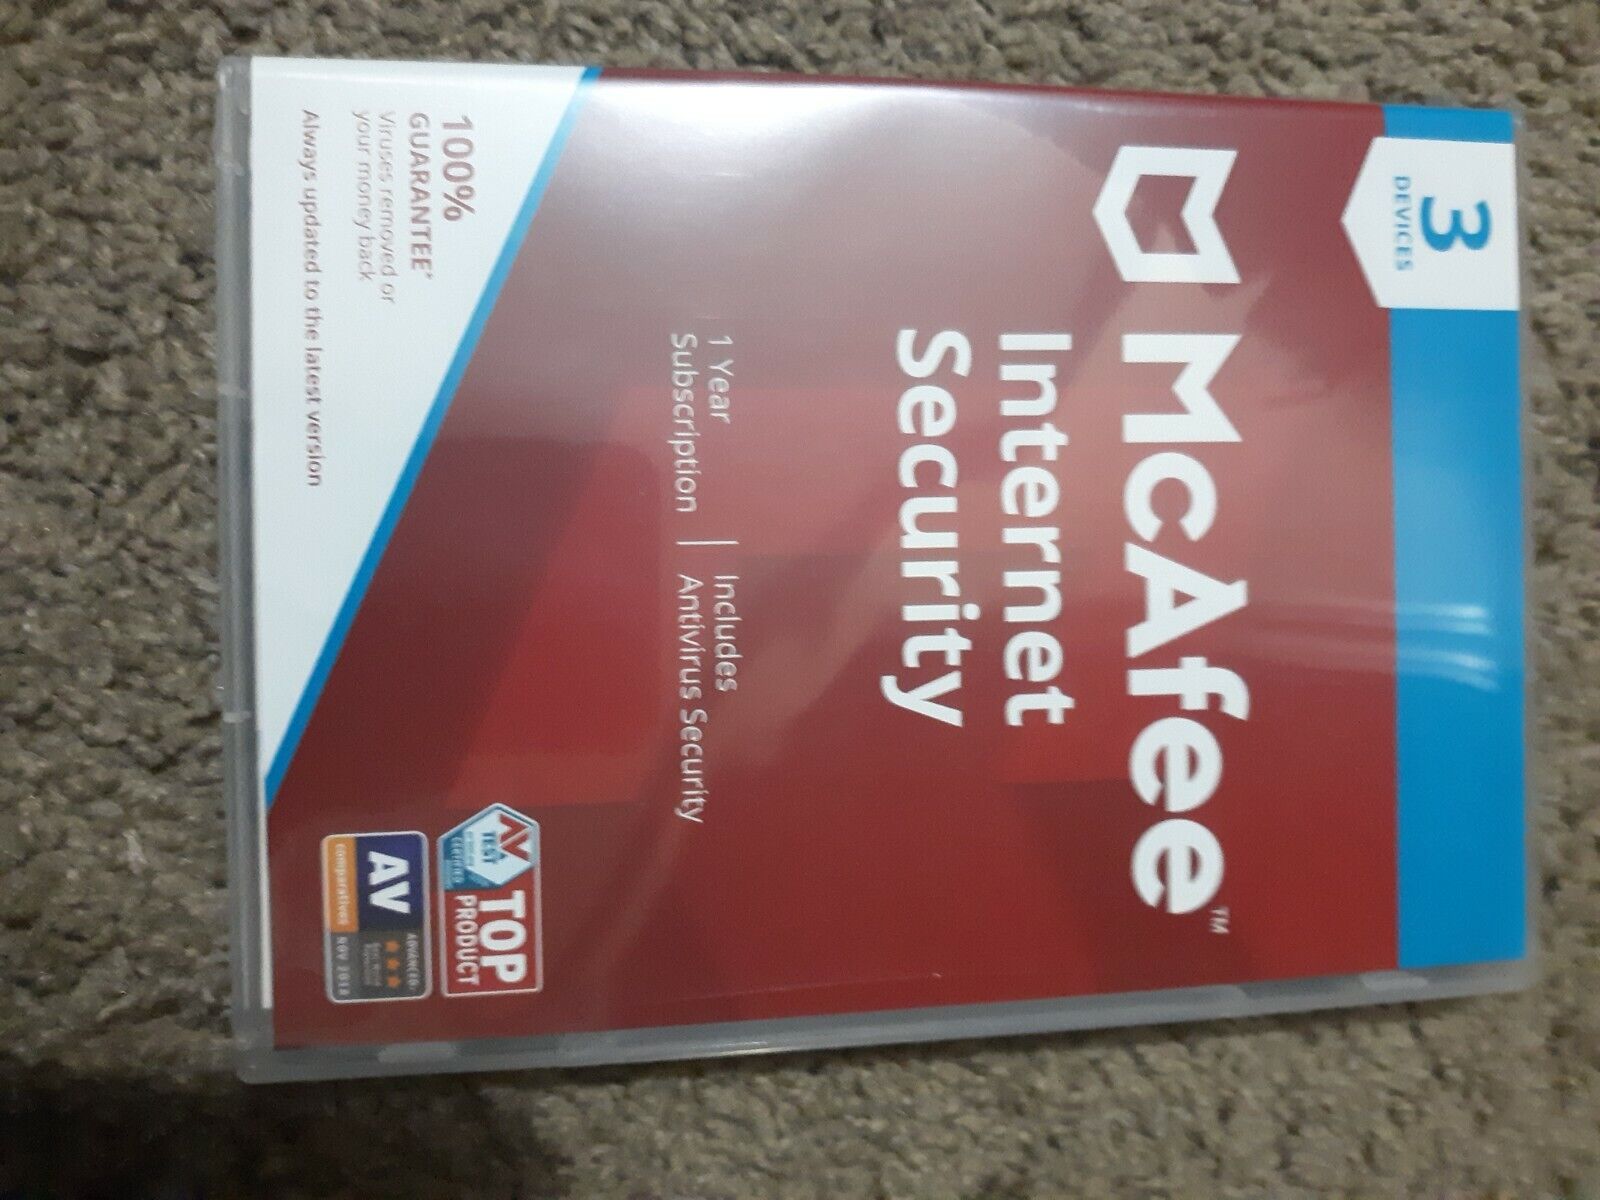 mcafee internet security NEW SEALED 3 device